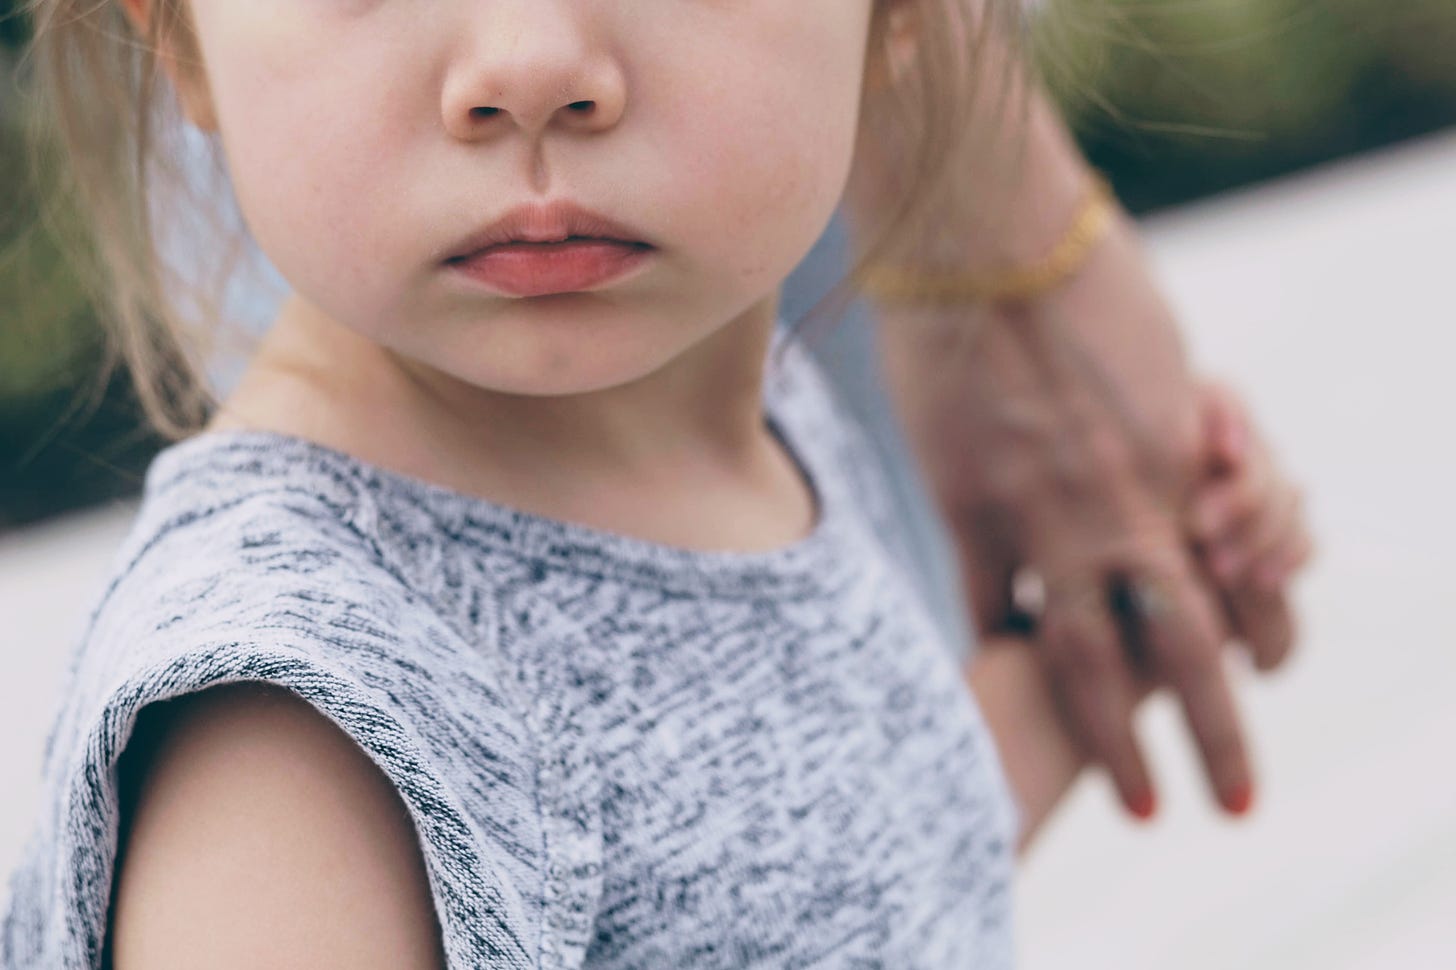 Photo of the lower half a toddler's face with a pouting expression. Photo by Joshua Hoehne on Unsplash